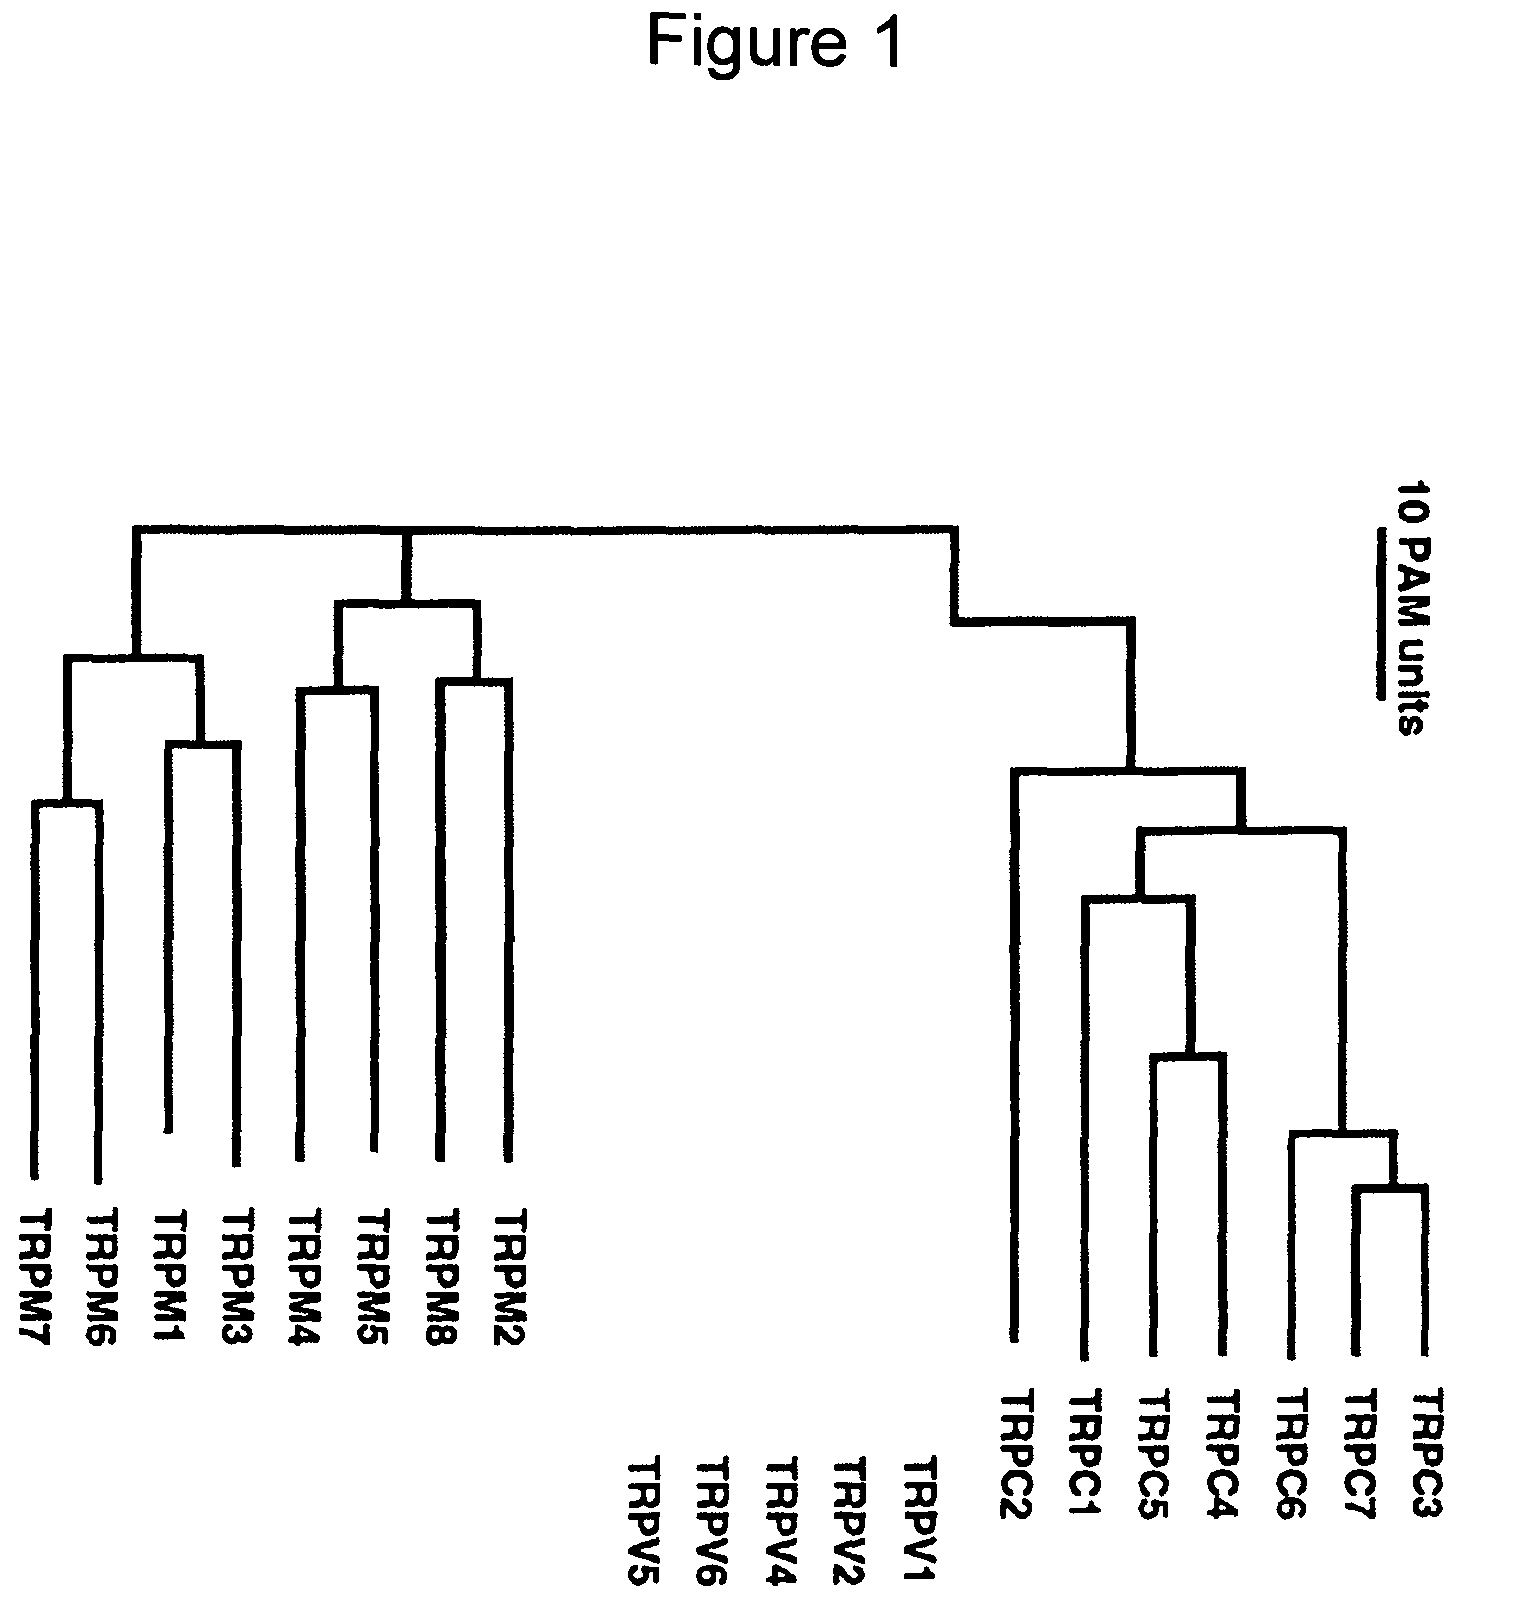 Method of determining inhibition of binding to TRPM7 protein